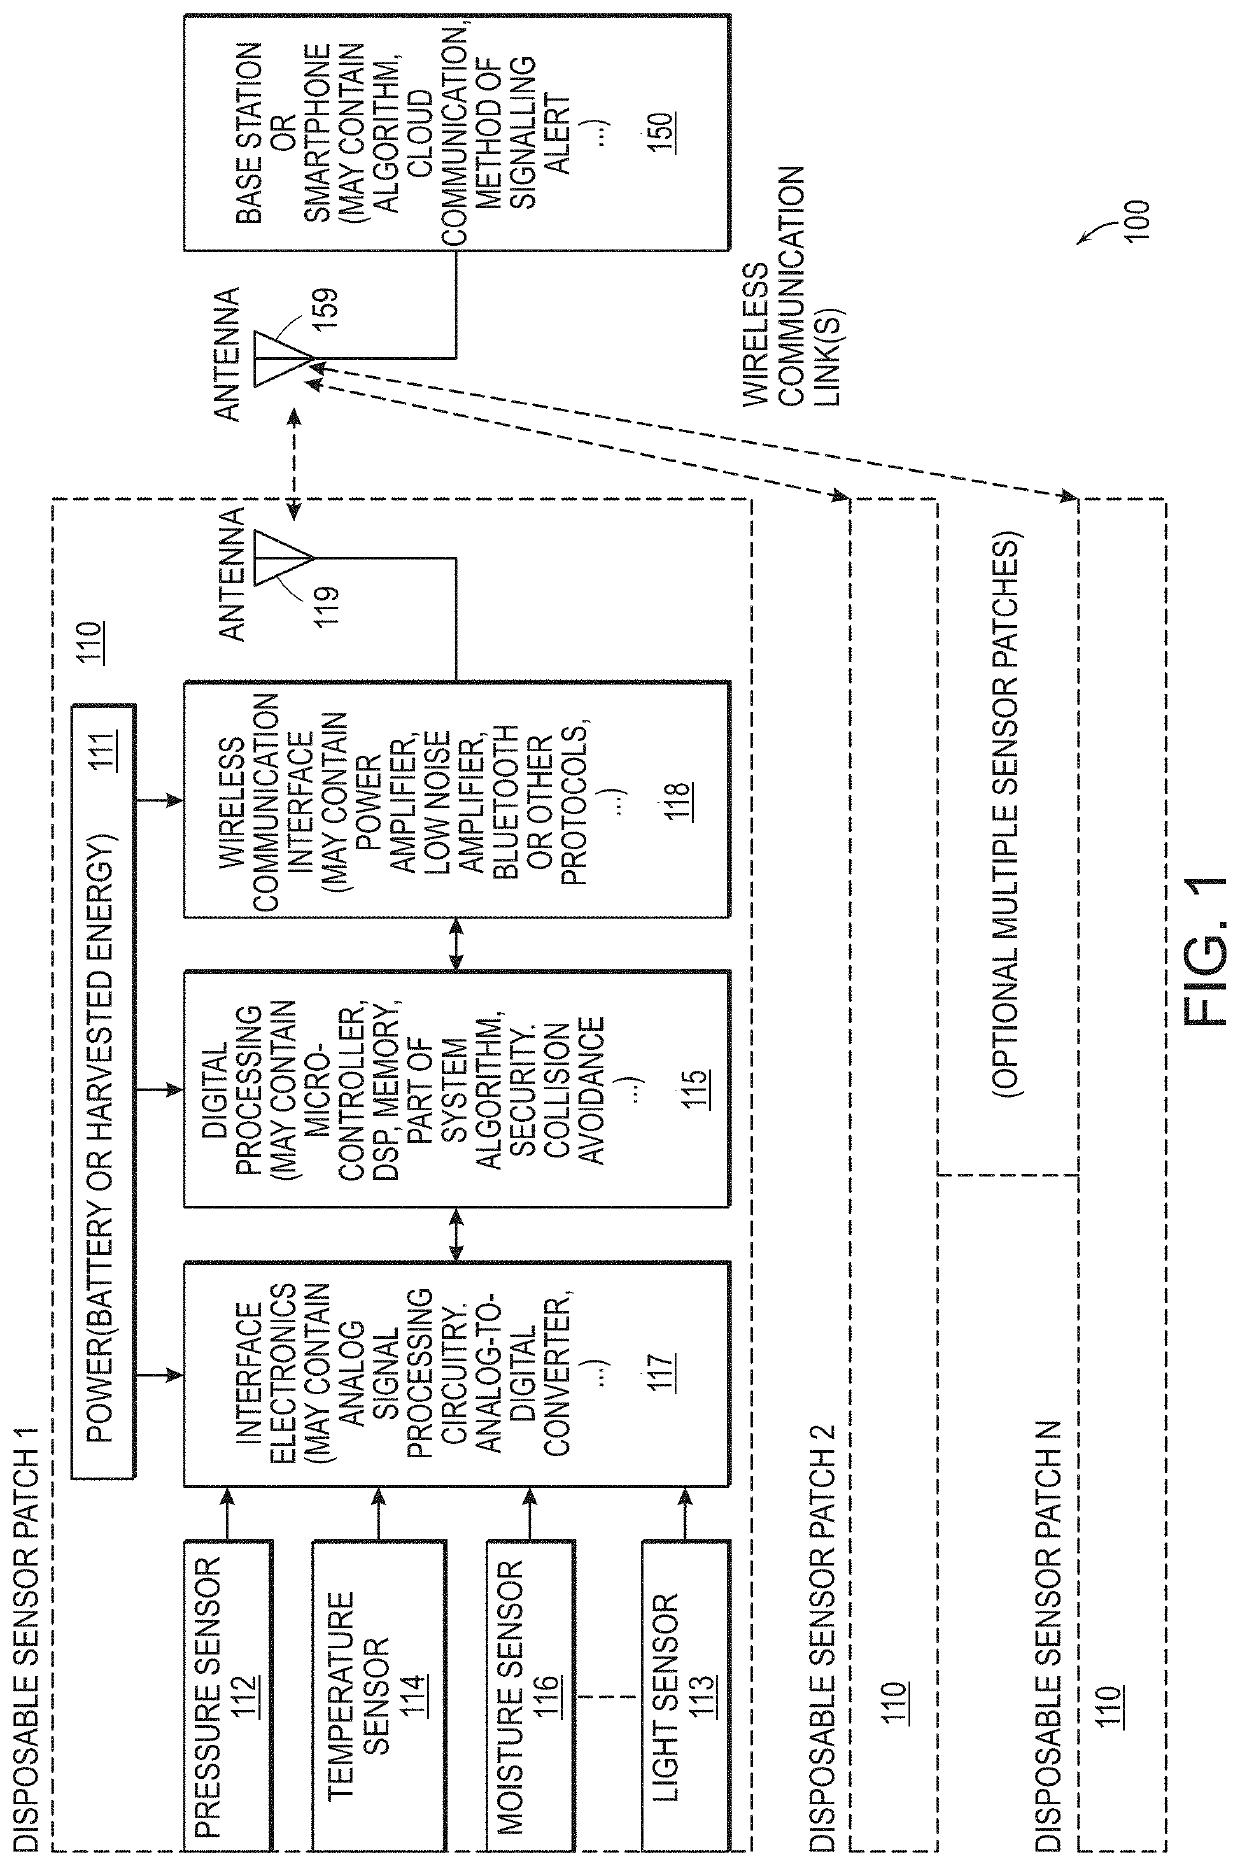 Systems and methods for prevention of pressure ulcers